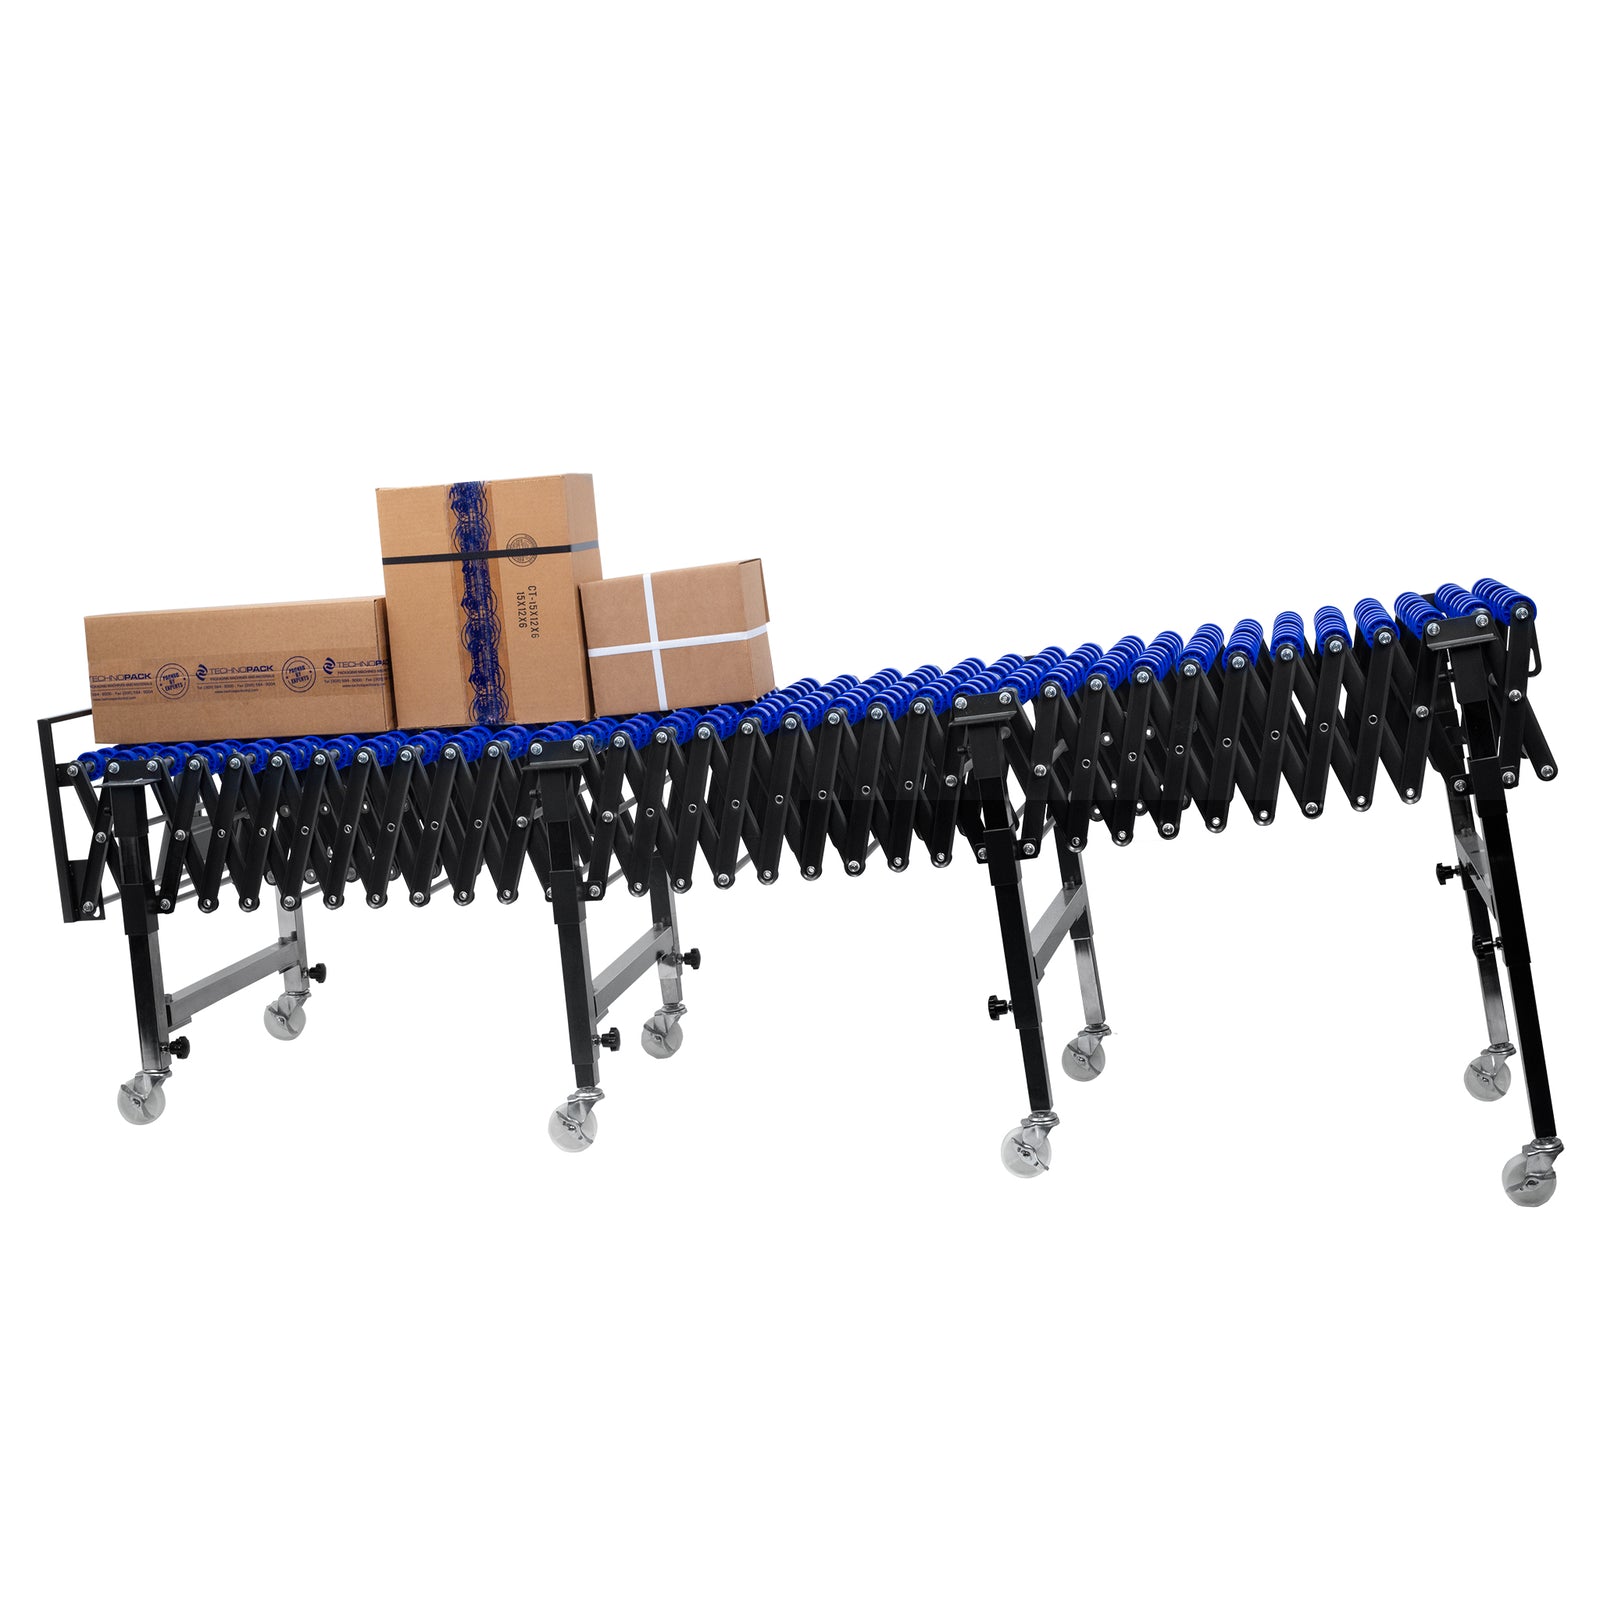 gravity skate wheel conveyor with steel frame, blue wheels, and white rolling casters with three brown boxes on top. One side of the conveyor is lover that the other so that boxes can slide with gravity